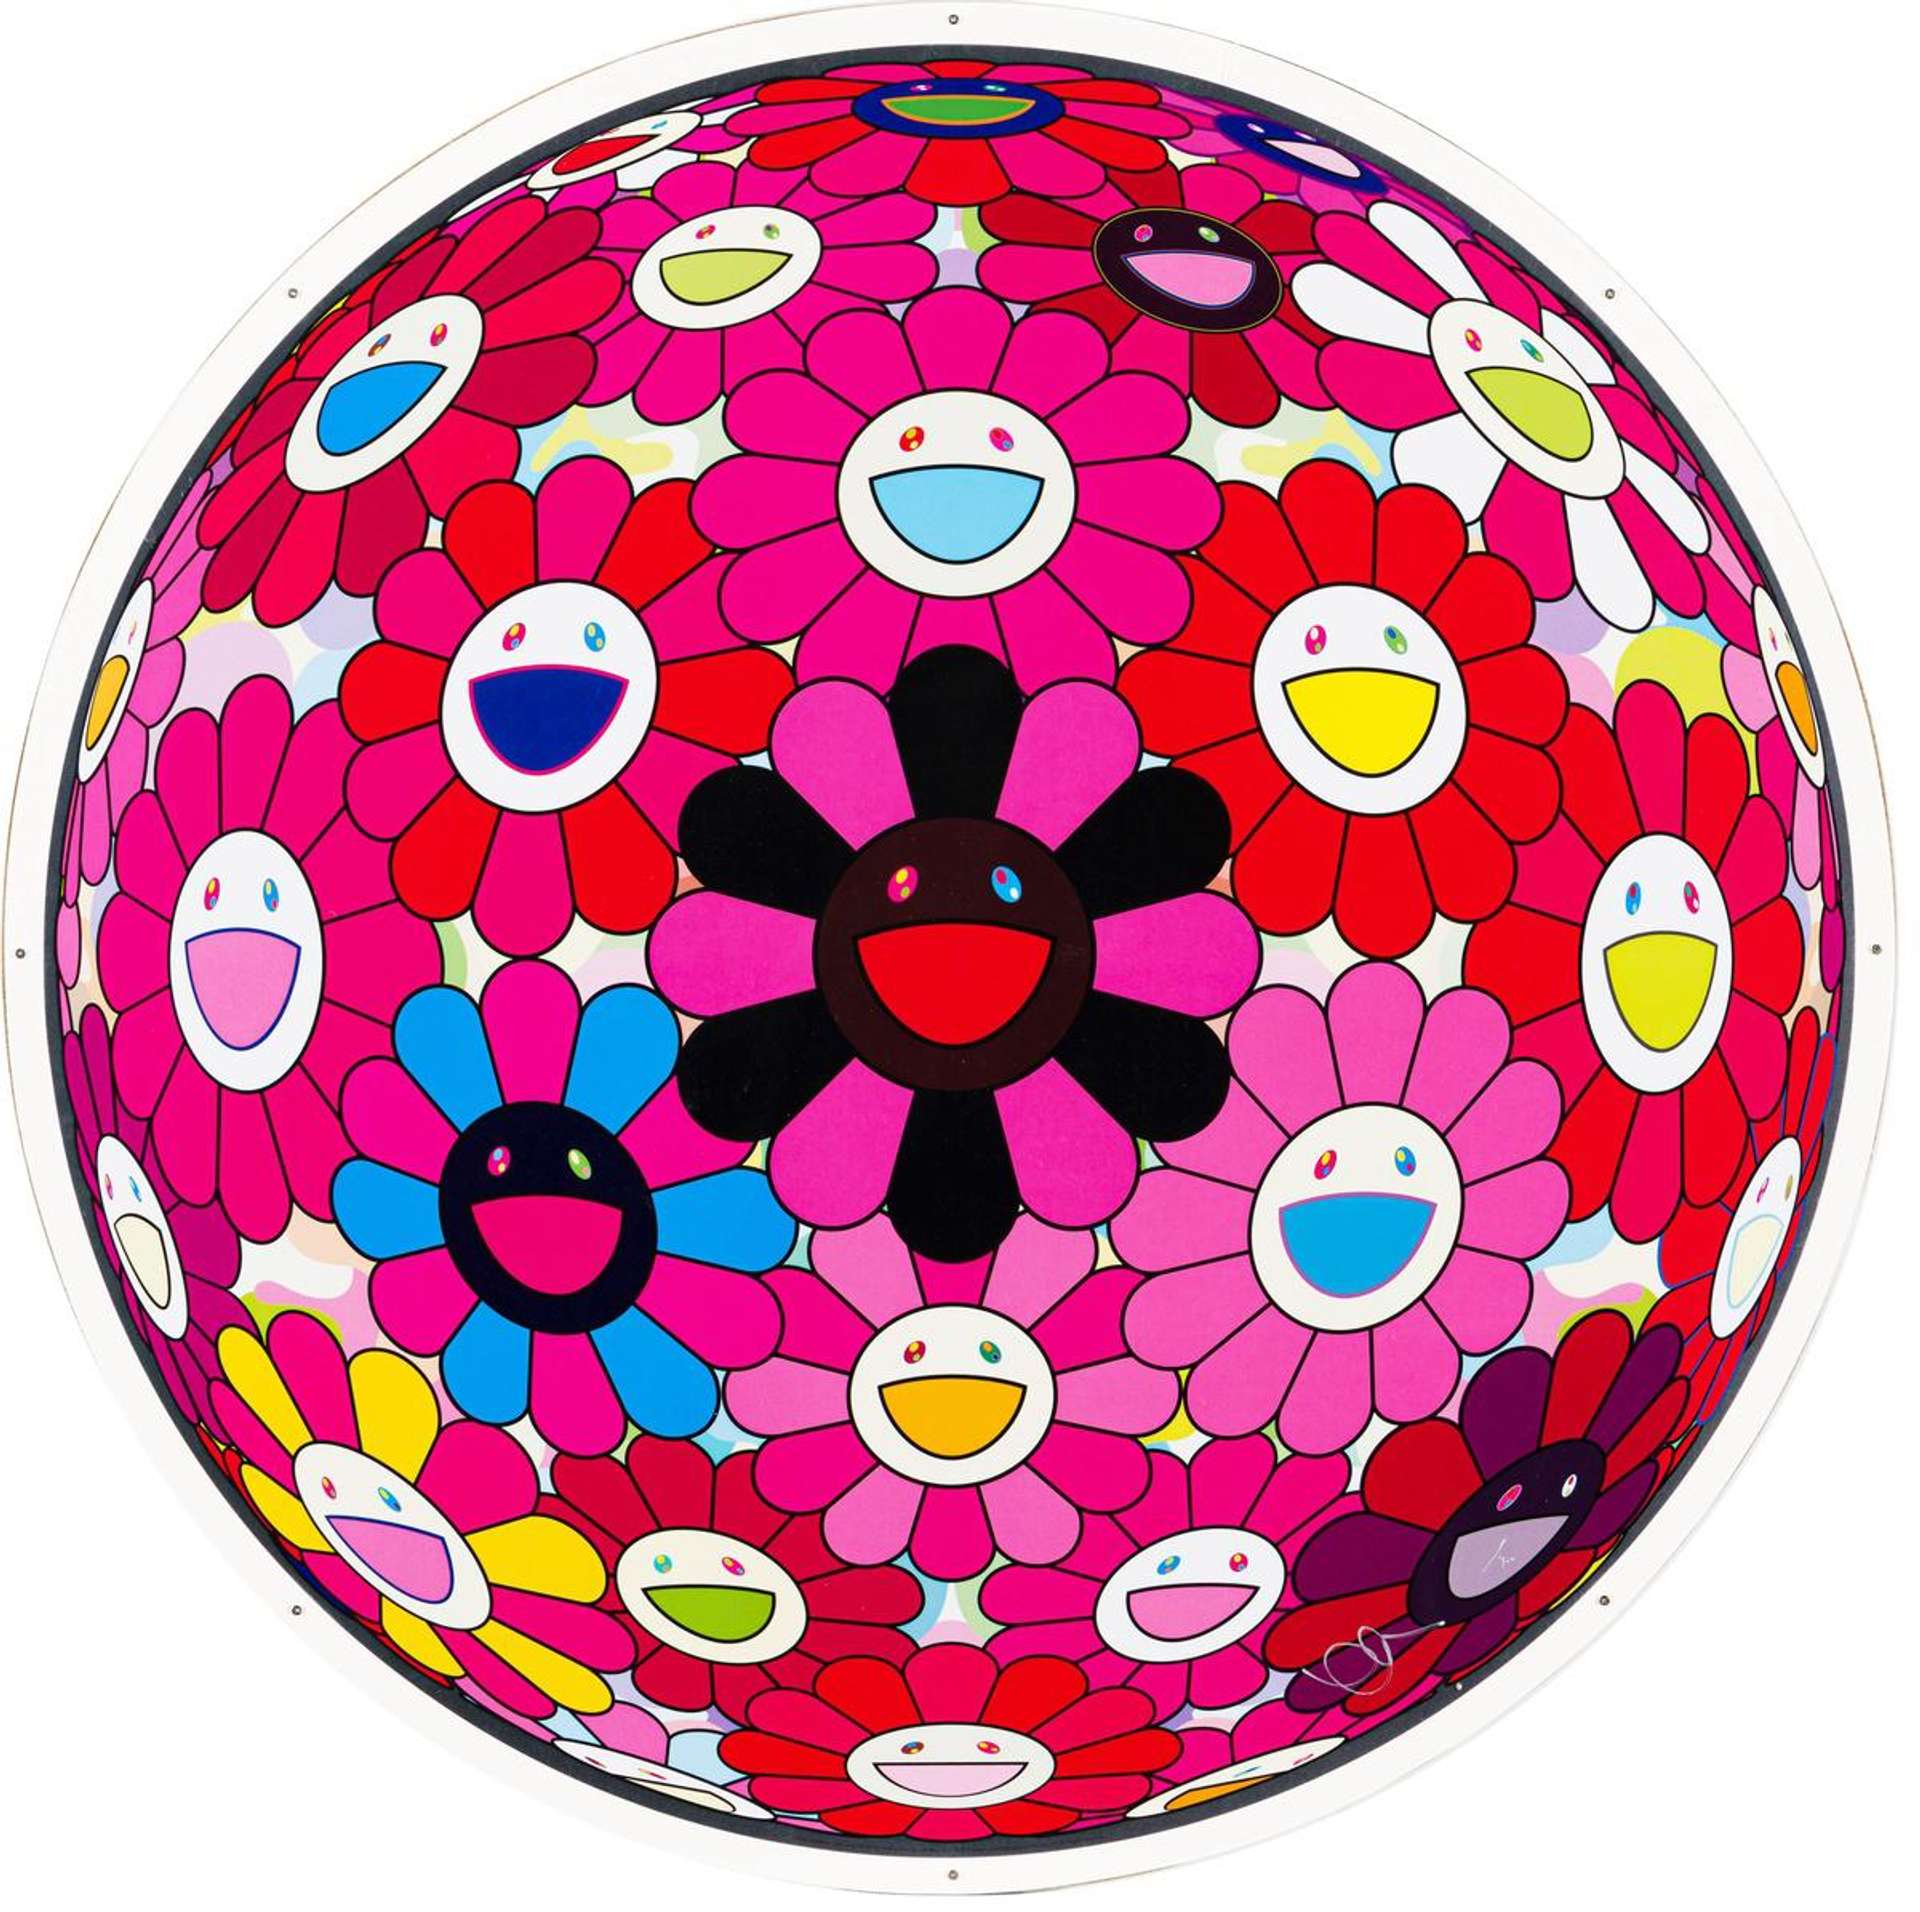 Flower Ball: There Is Nothing Eternal In This World That Is Why You Are Beautiful - Signed Print by Takashi Murakami 2014 - MyArtBroker